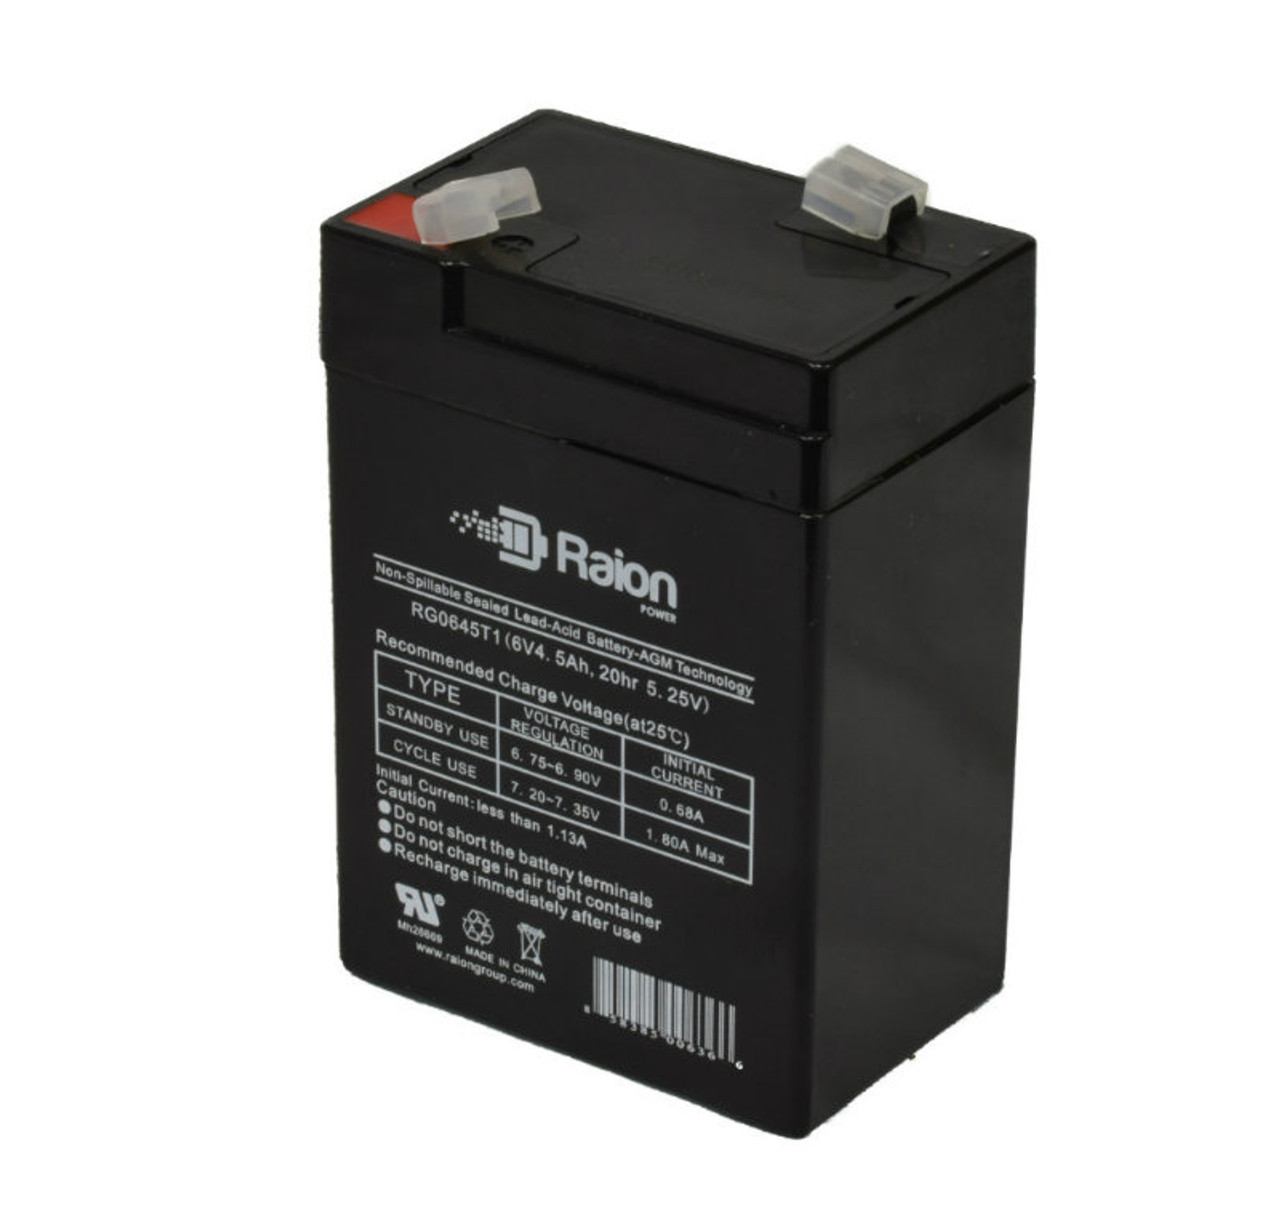 Raion Power RG0645T1 6V 4.5Ah Replacement Battery Cartridge for Sigmas SPG6-5